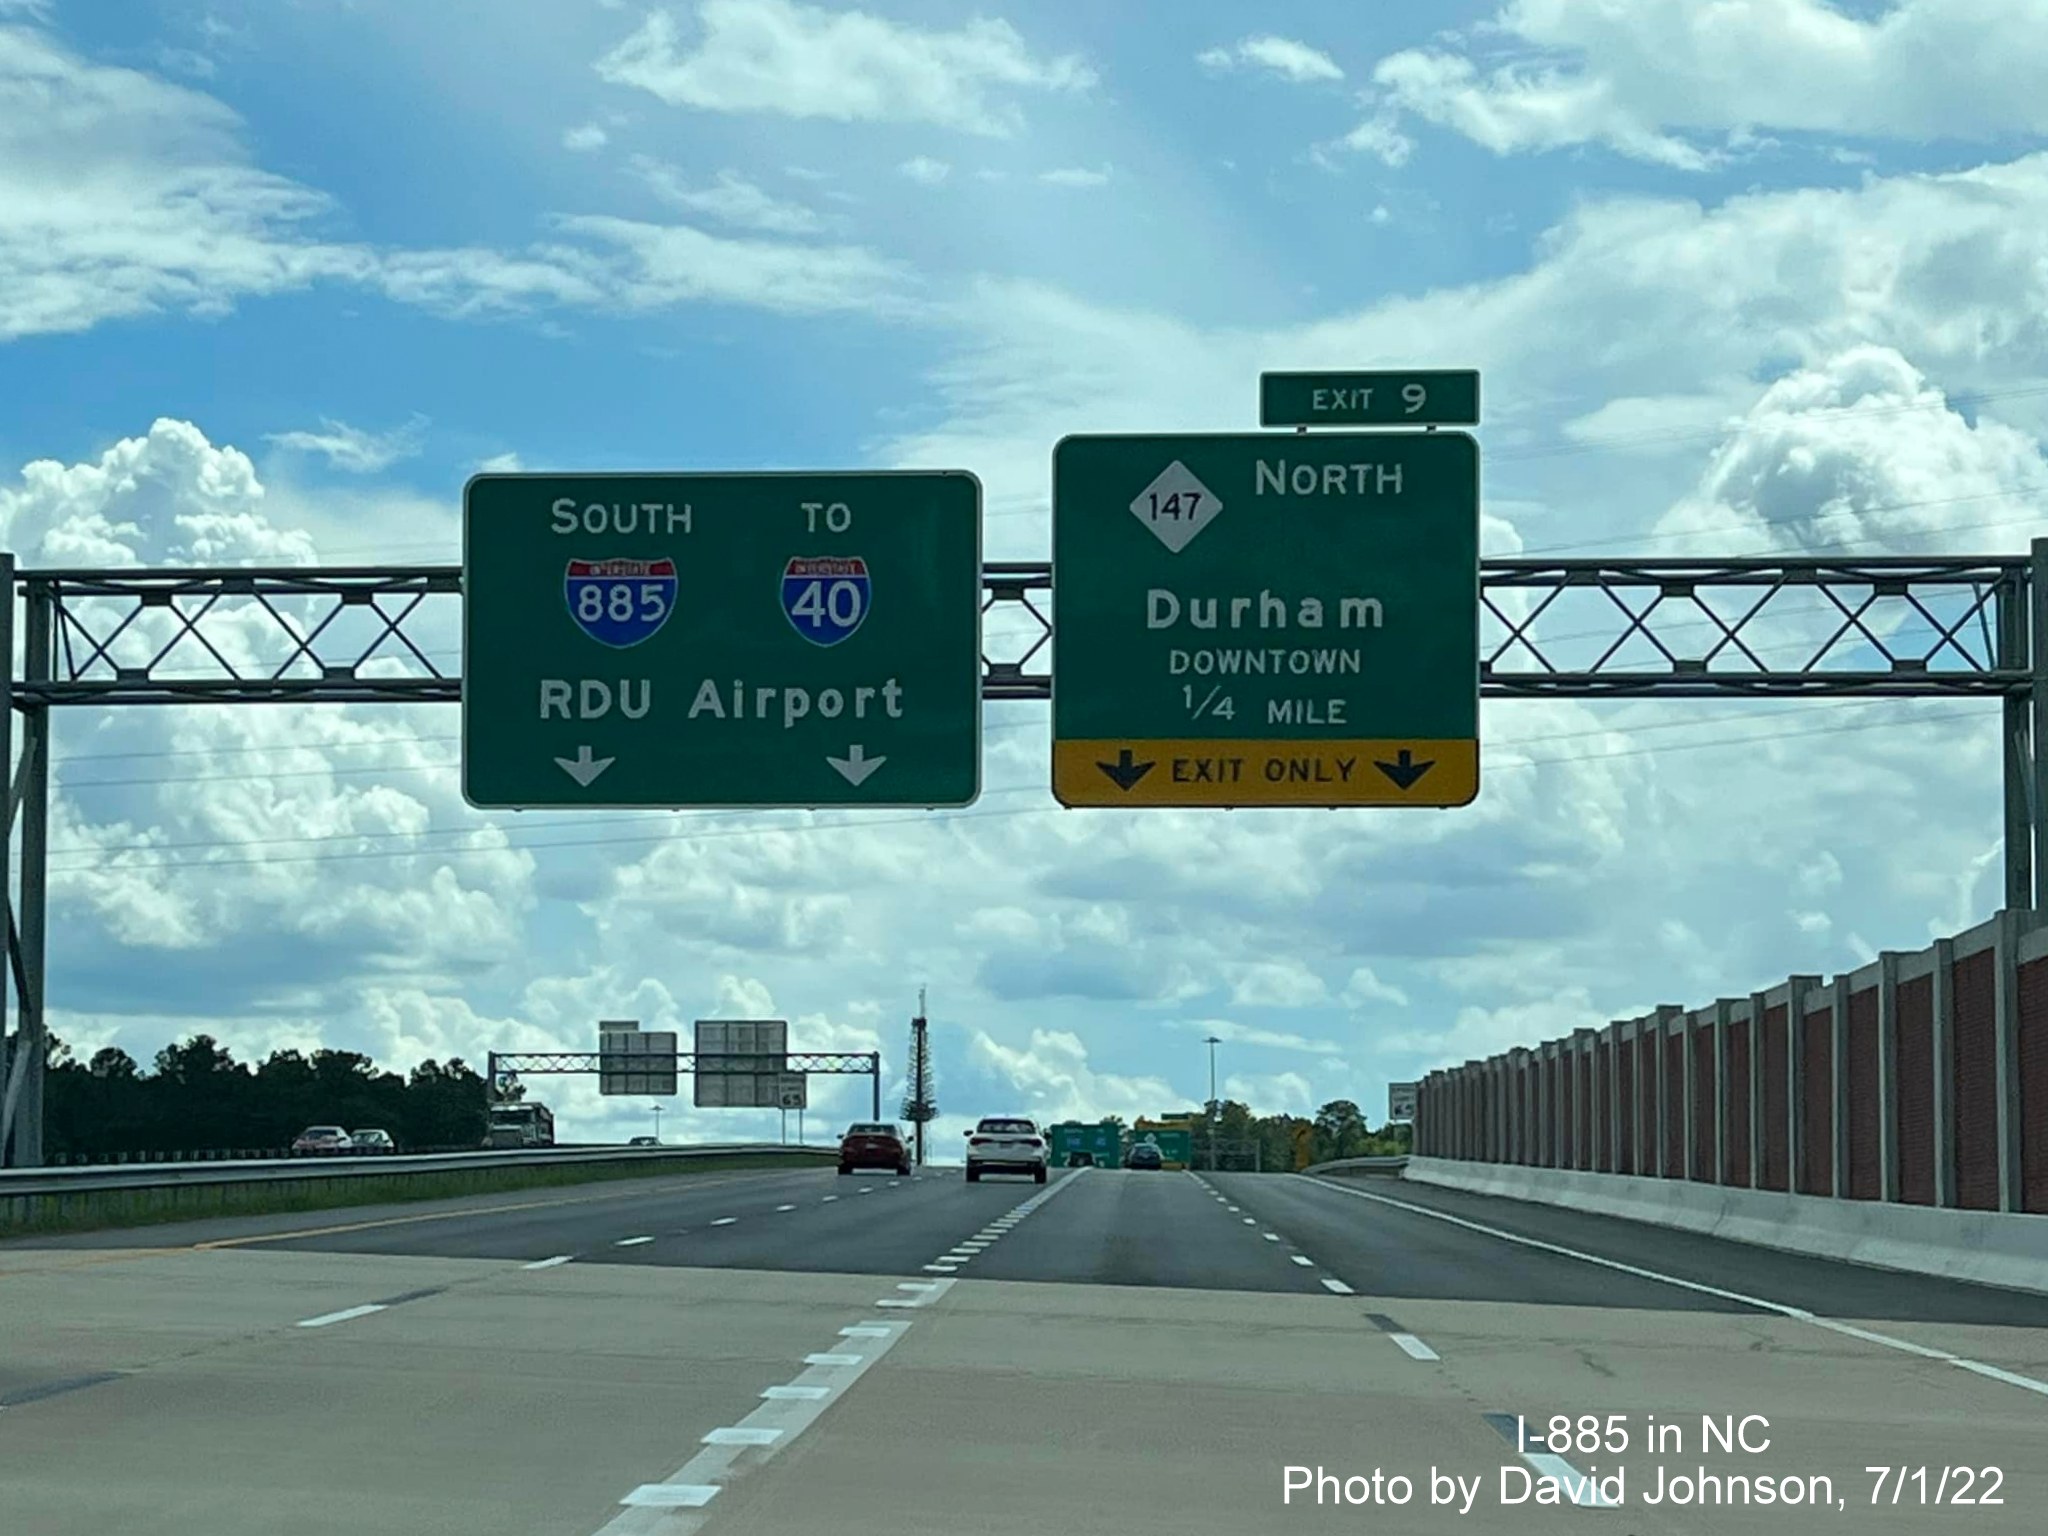 Image of overhead signs for upcoming NC 147 exit on East End Connector in Durham, by David Johnson July 2022